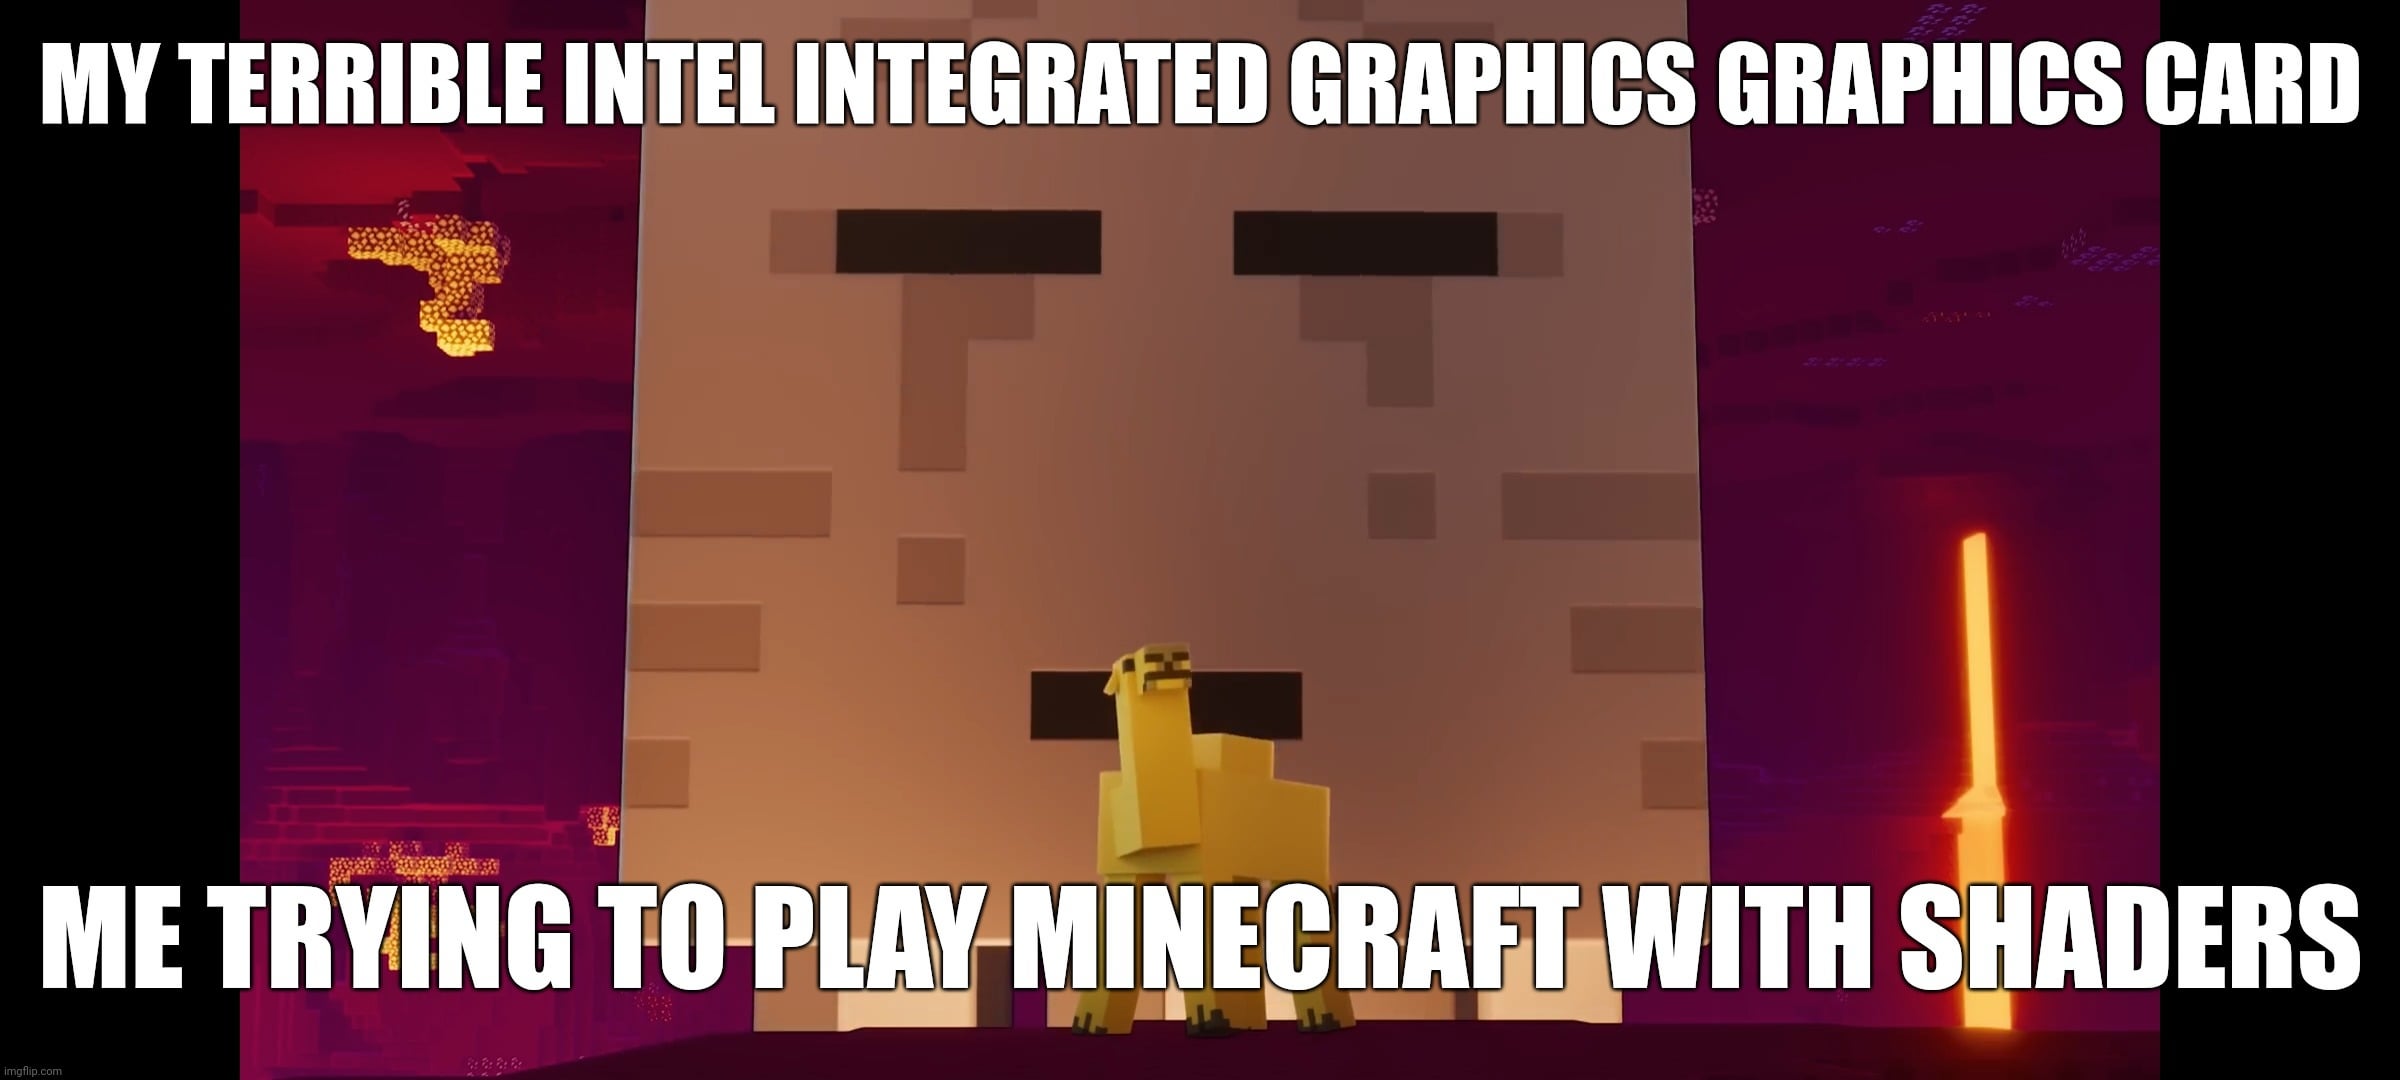 Minecraft Memes - can run Minesweeper faster than Minecraft.